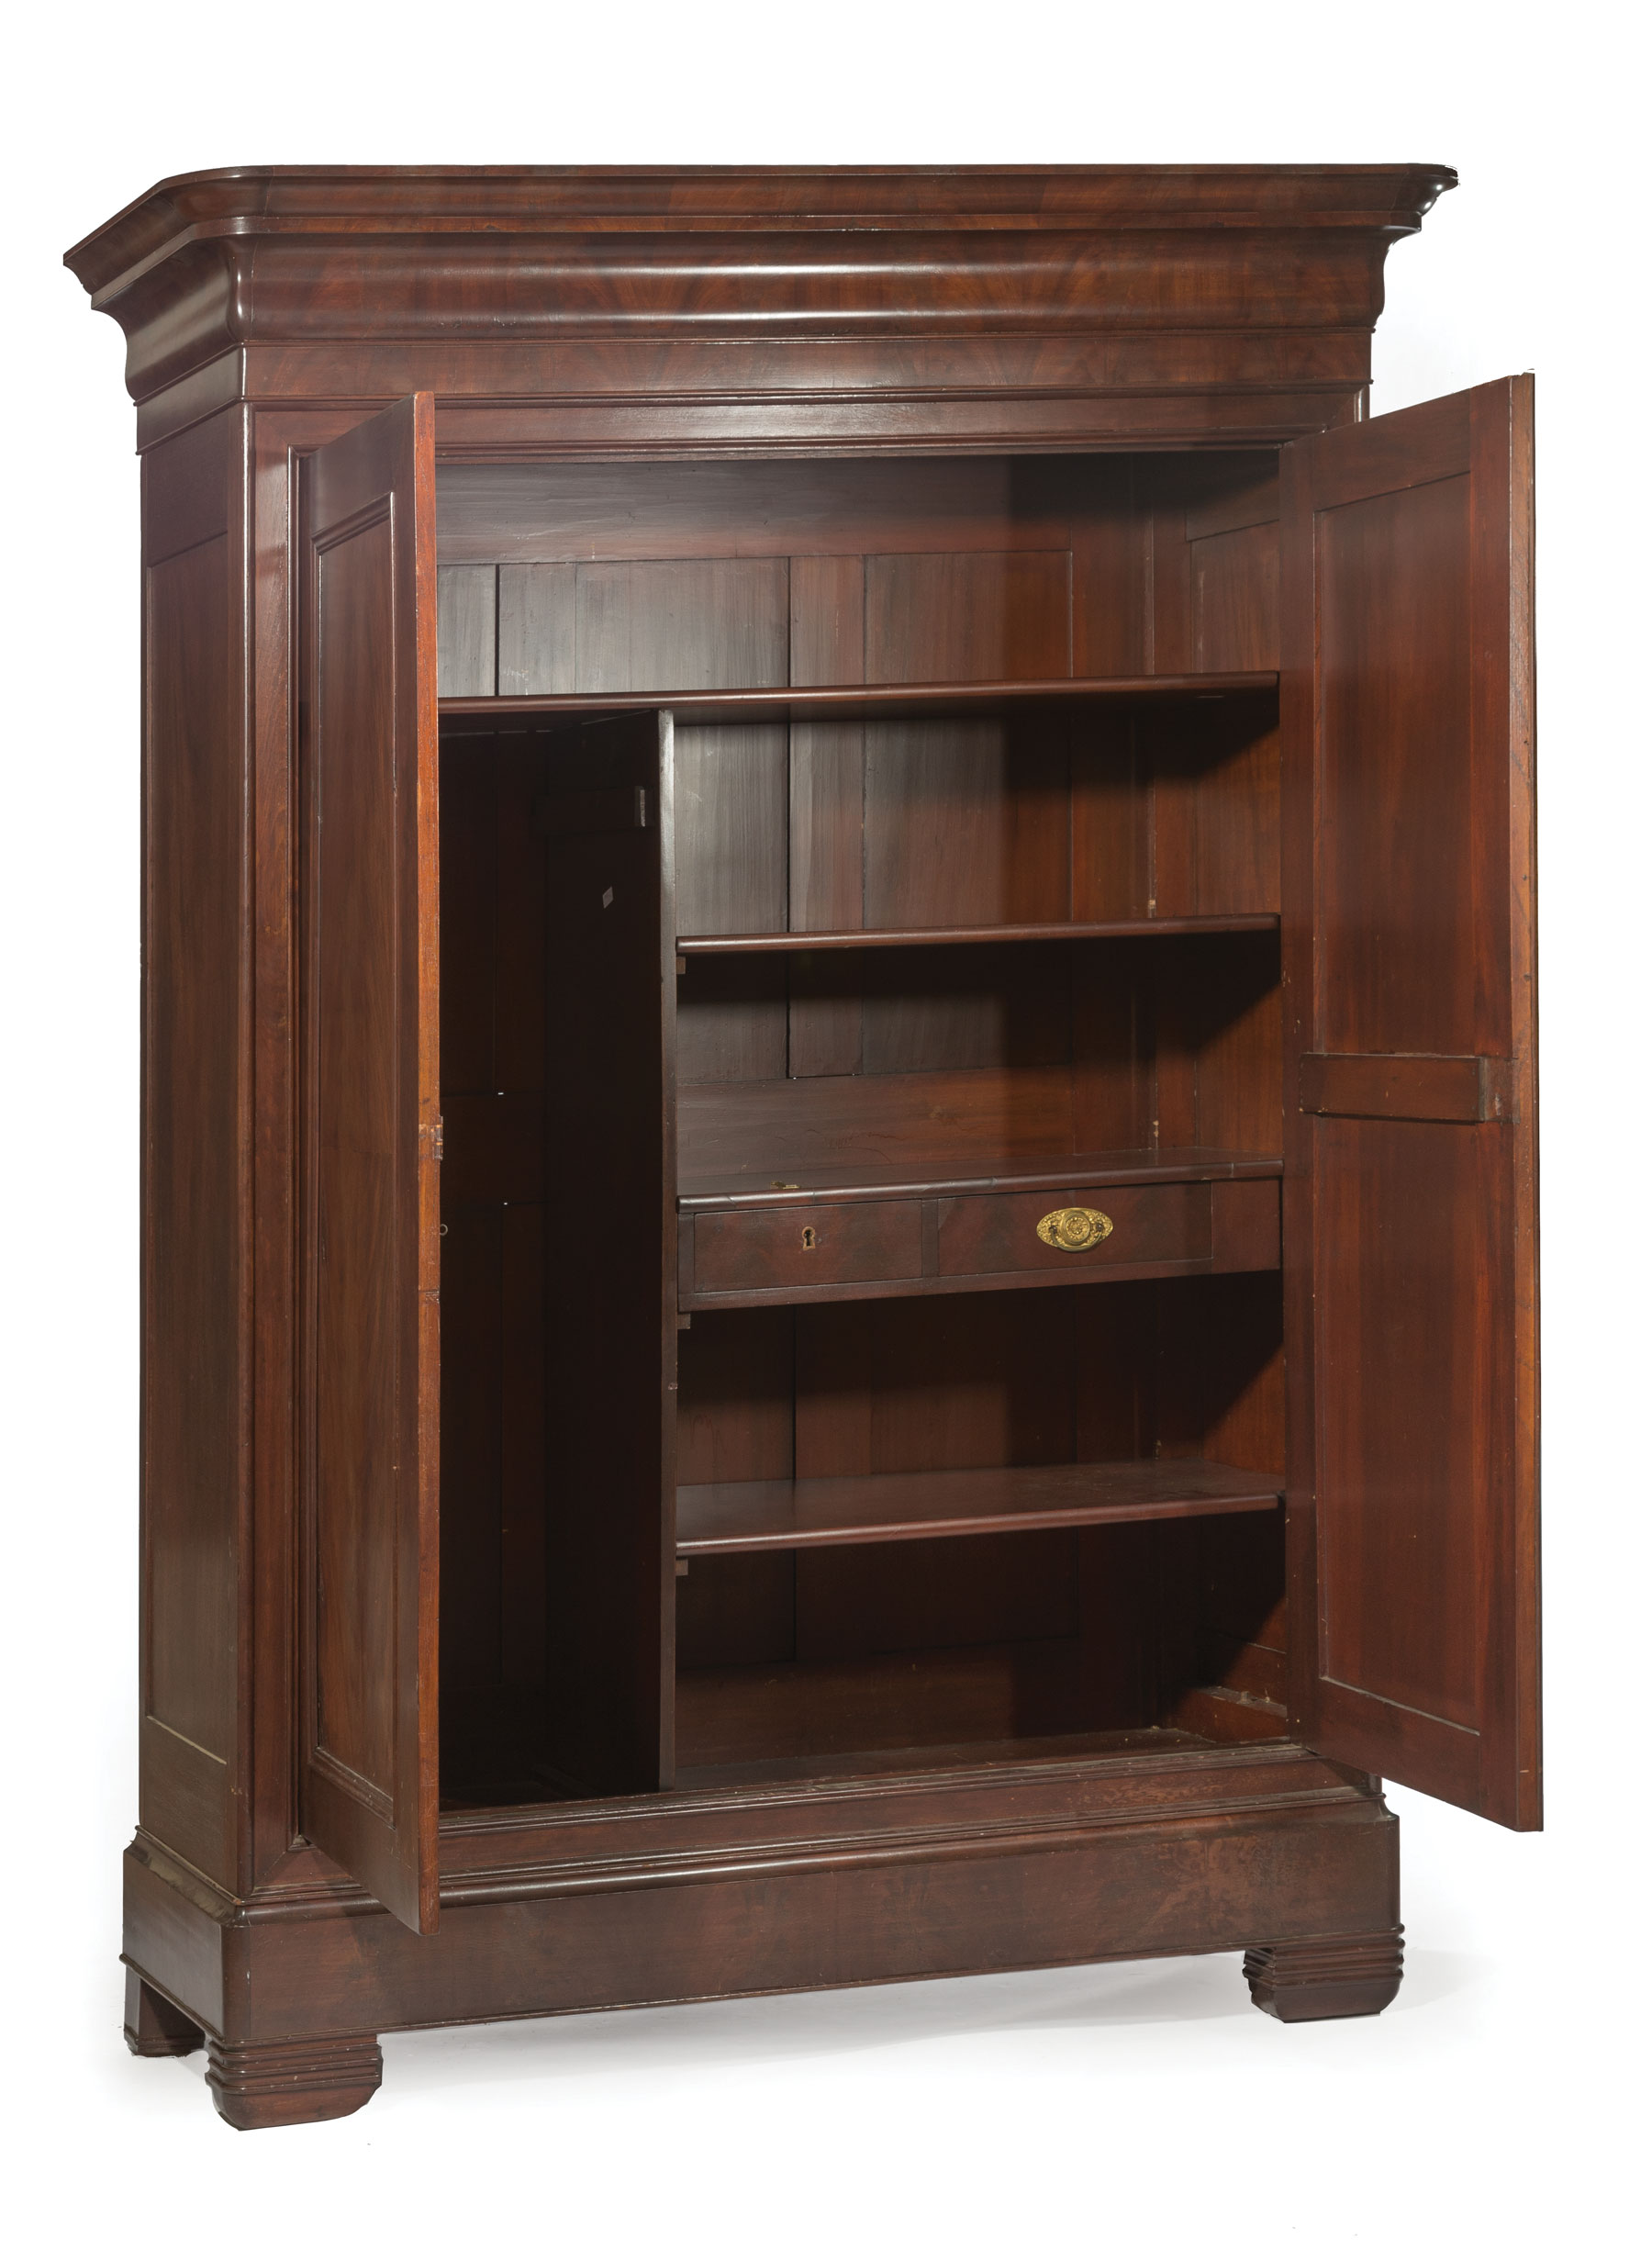 Louisiana Figured Mahogany Armoire , mid-19th c., stepped ogee cornice, molded bookmatched door - Image 3 of 3